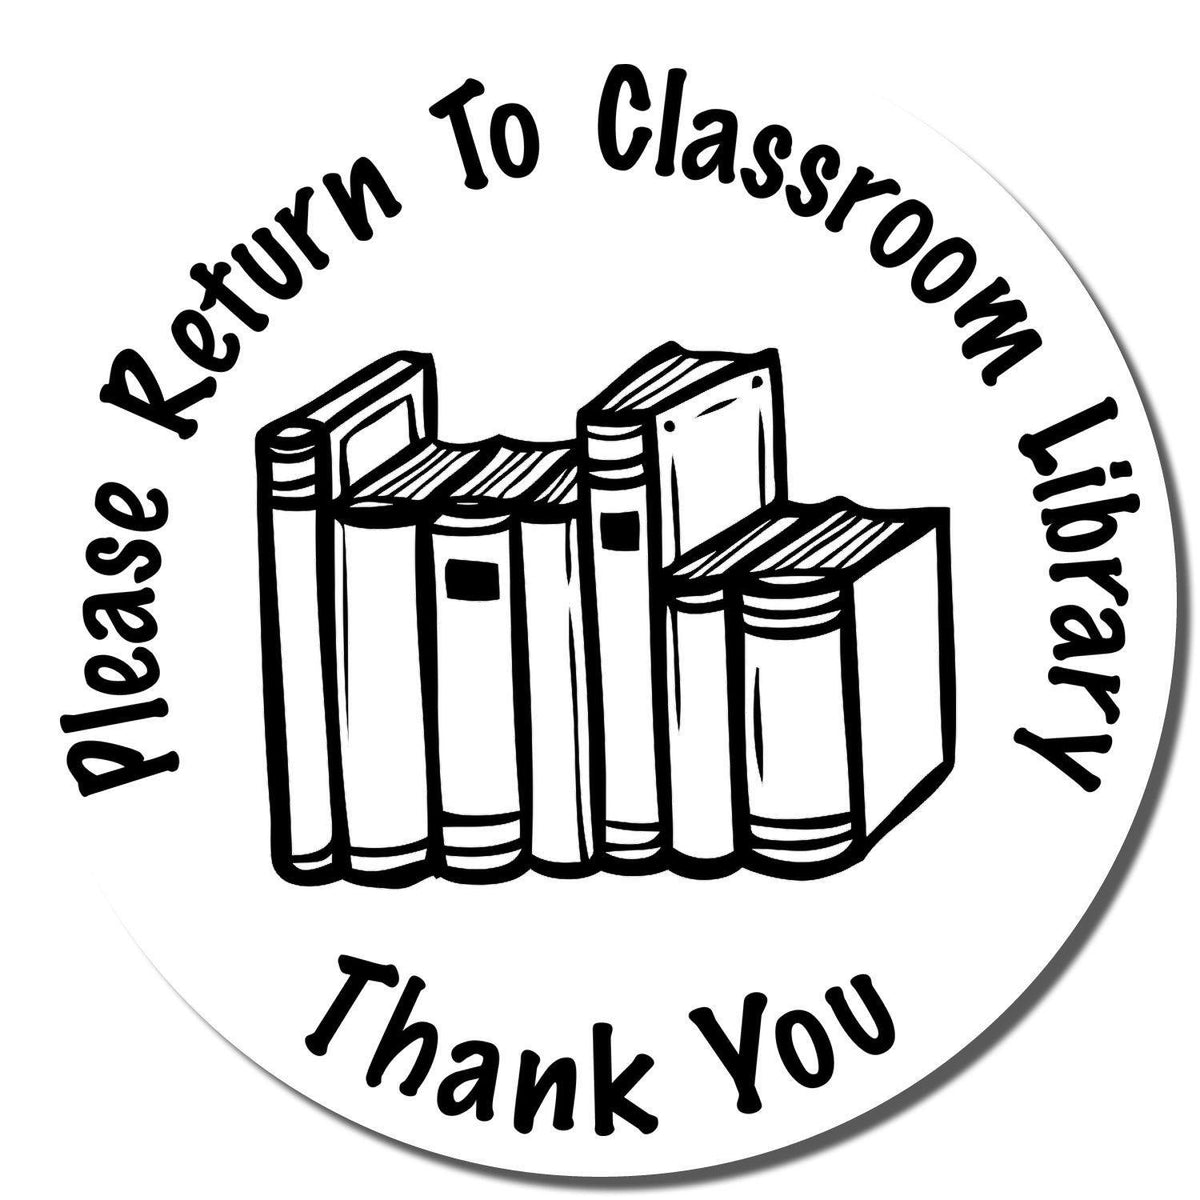 Round Please Return to Classroom Rubber Stamp - Engineer Seal Stamps - Brand_Acorn, Impression Size_Small, Stamp Type_Regular Stamp, Type of Use_Teacher